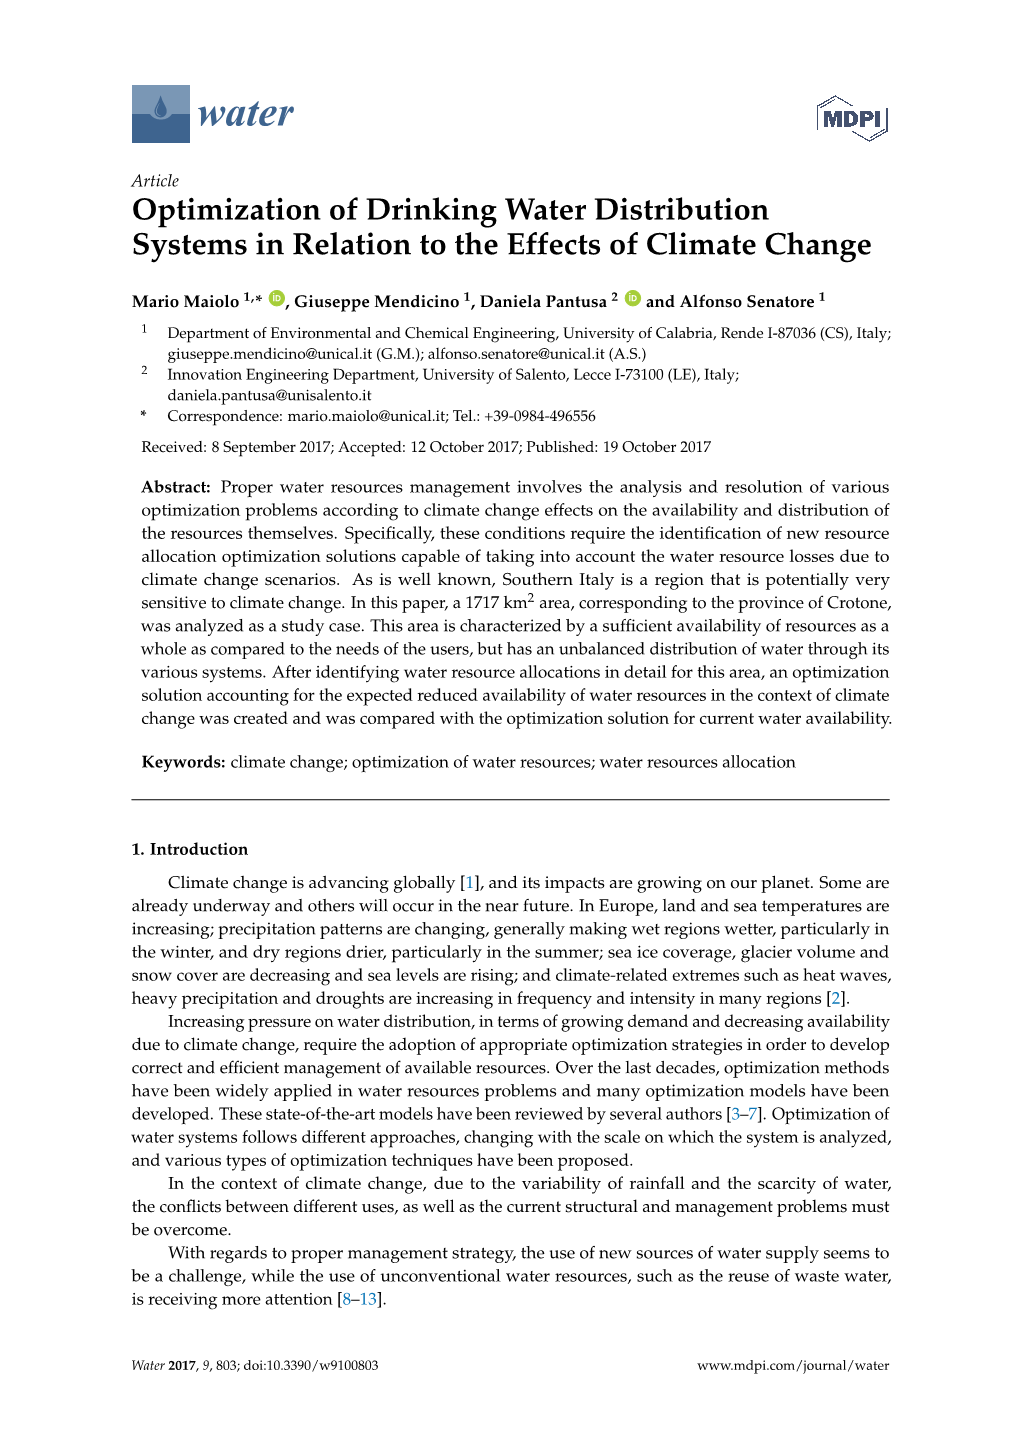 Optimization of Drinking Water Distribution Systems in Relation to the Effects of Climate Change